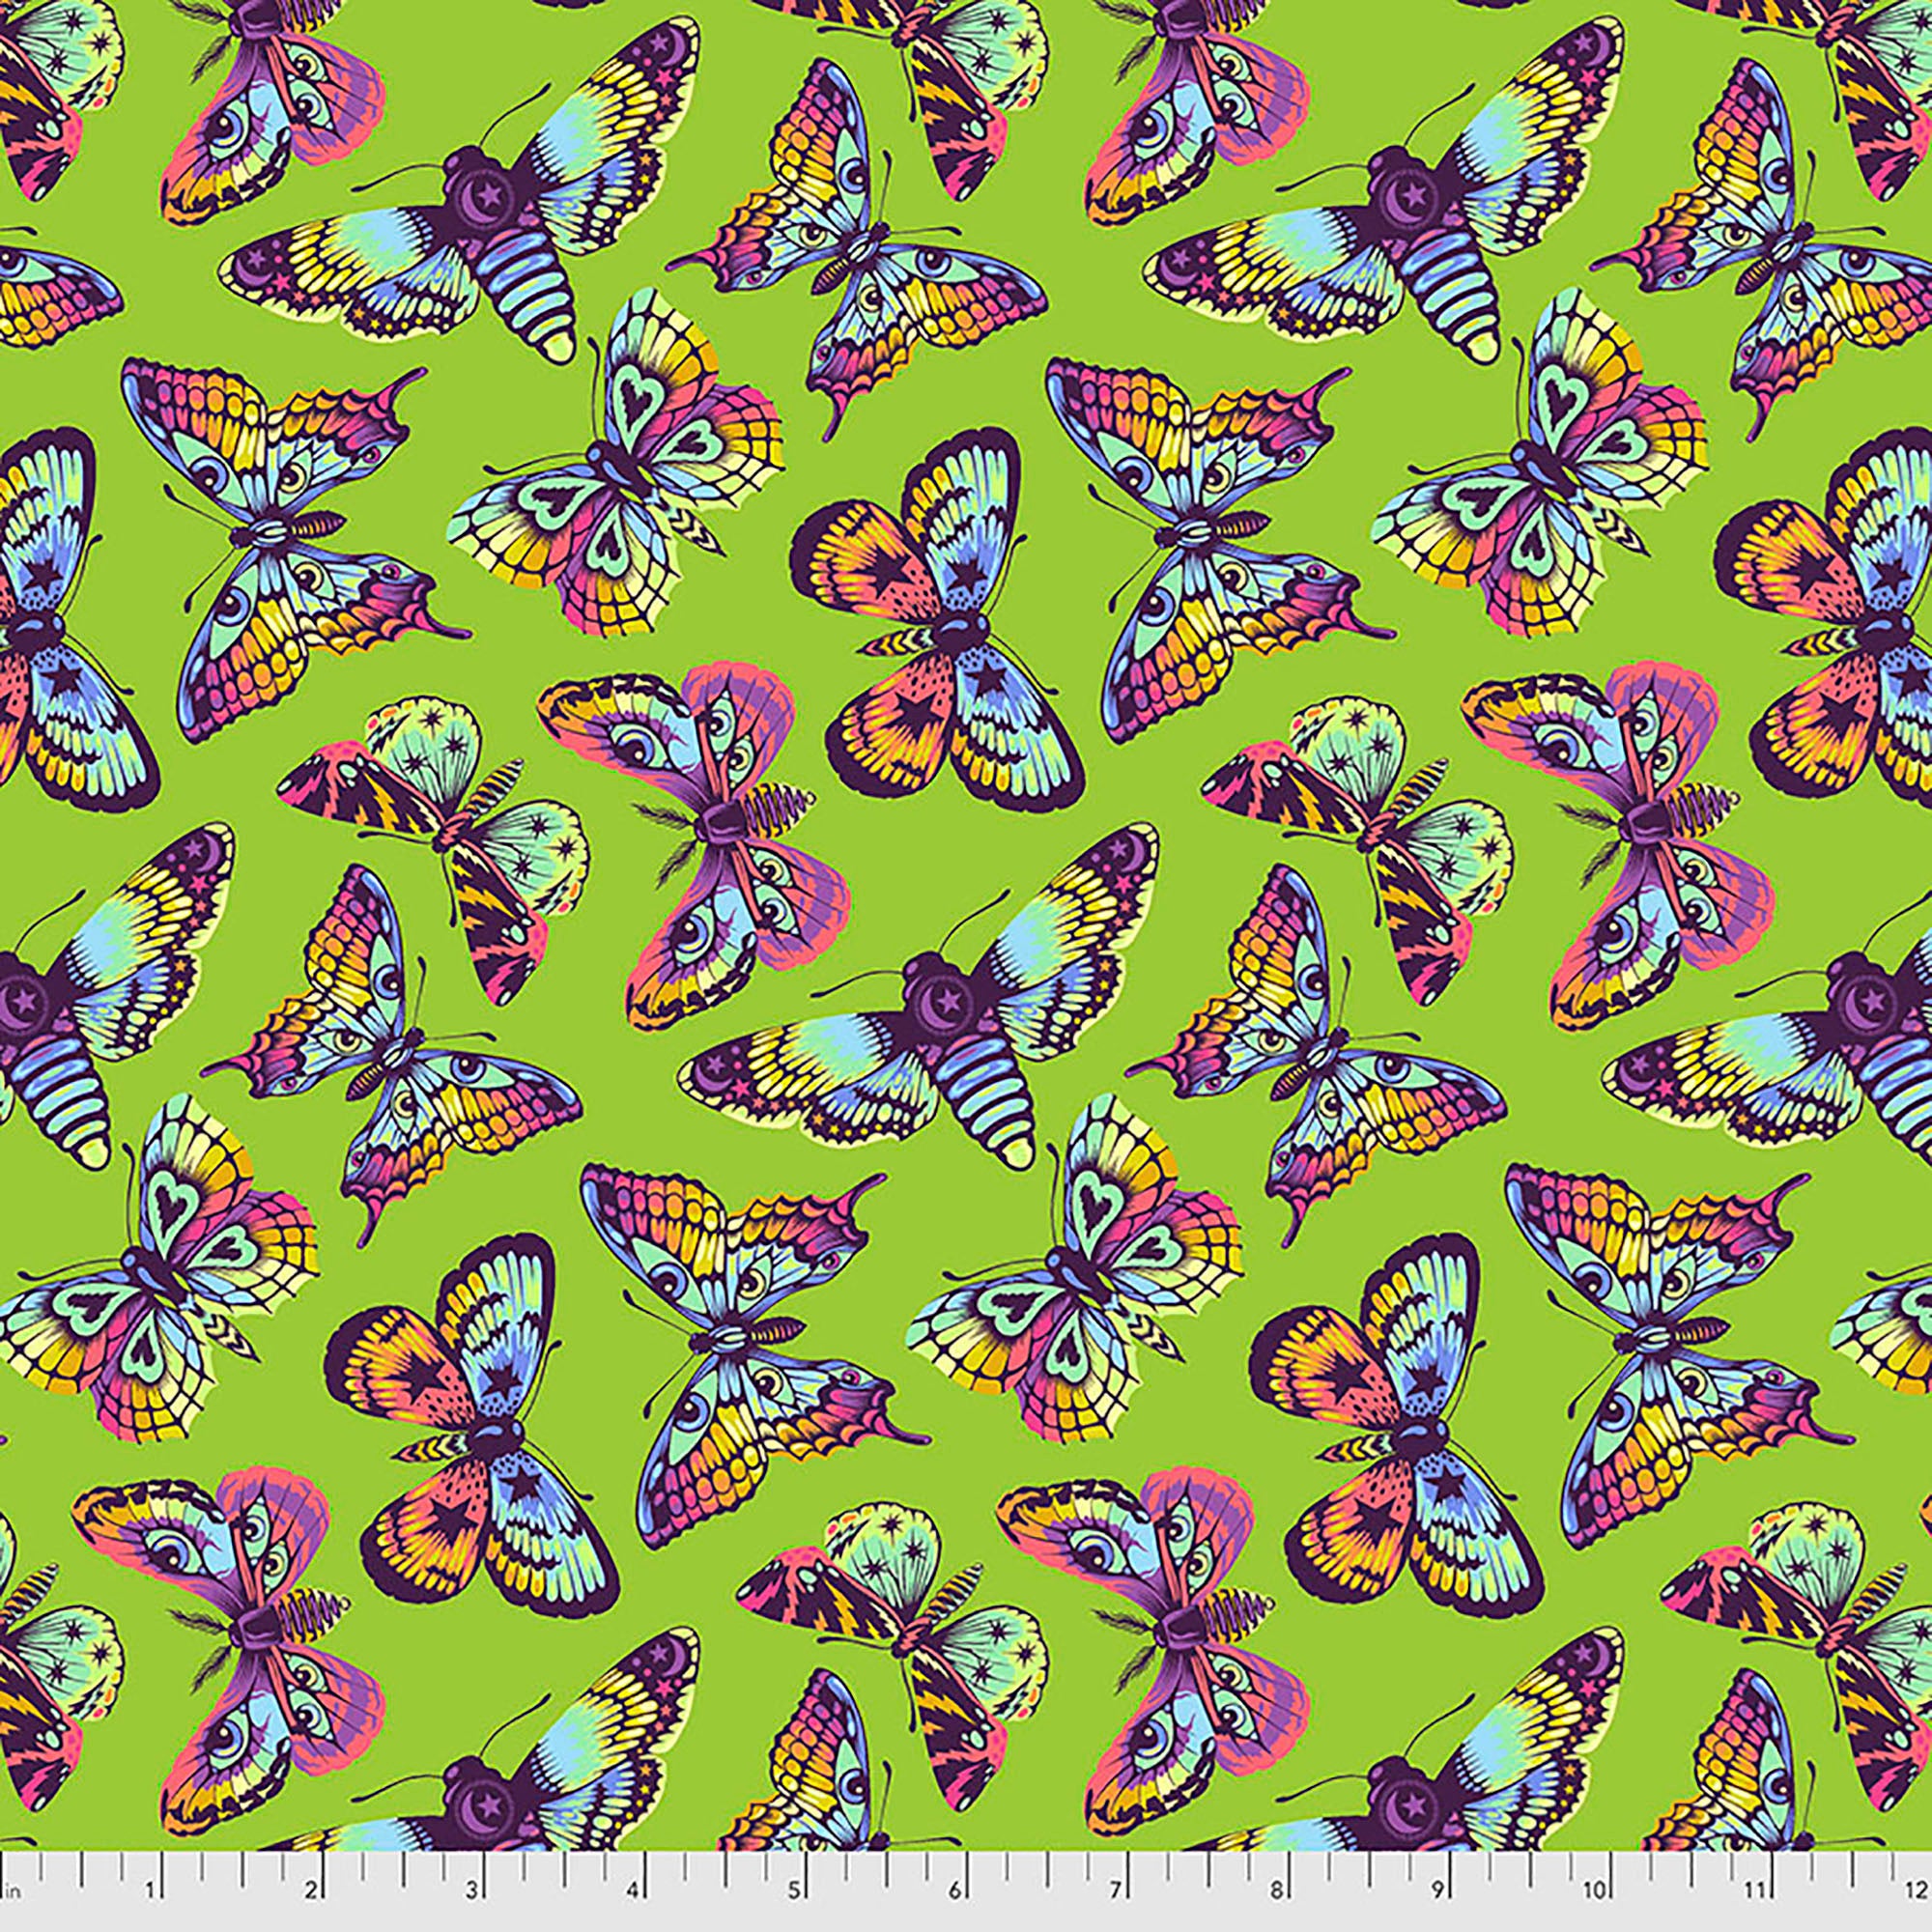 Daydreamer - Butterfly Kisses - Avocado Fabric